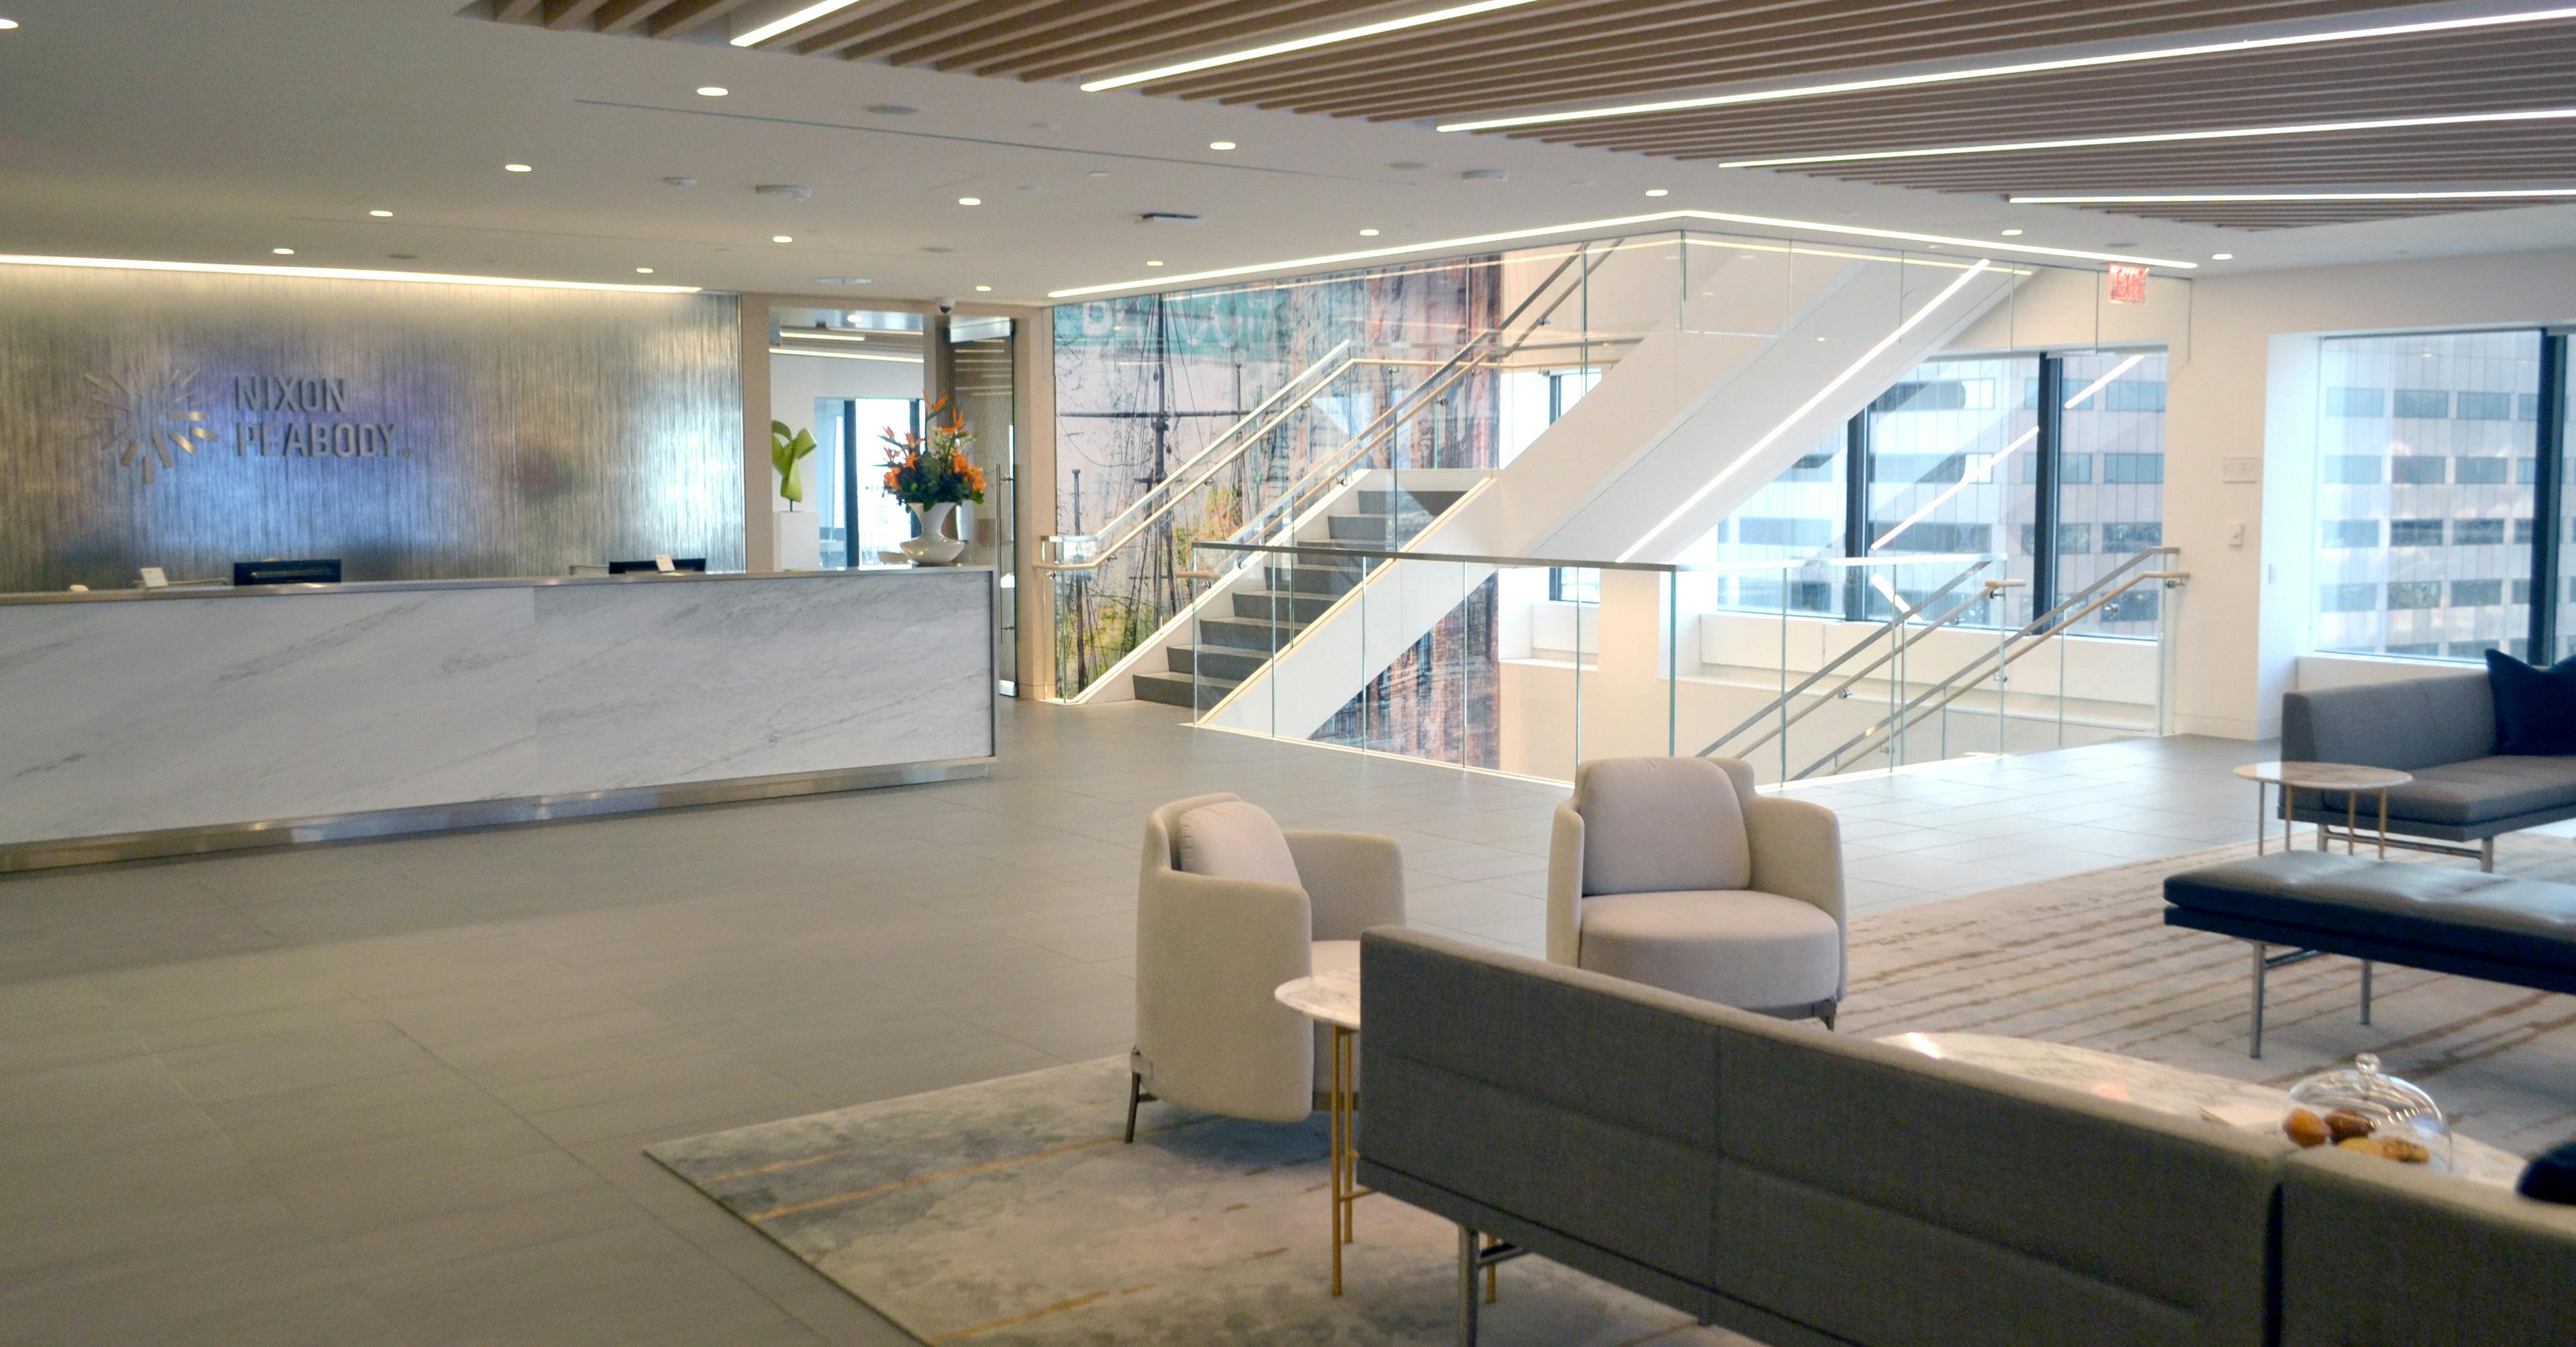 Interior of Nixon Peabody's Boston office lobby, showing a large reception desk in the background, a glass-enclosed stairwell to the right, and a lounge/waiting area in the foreground